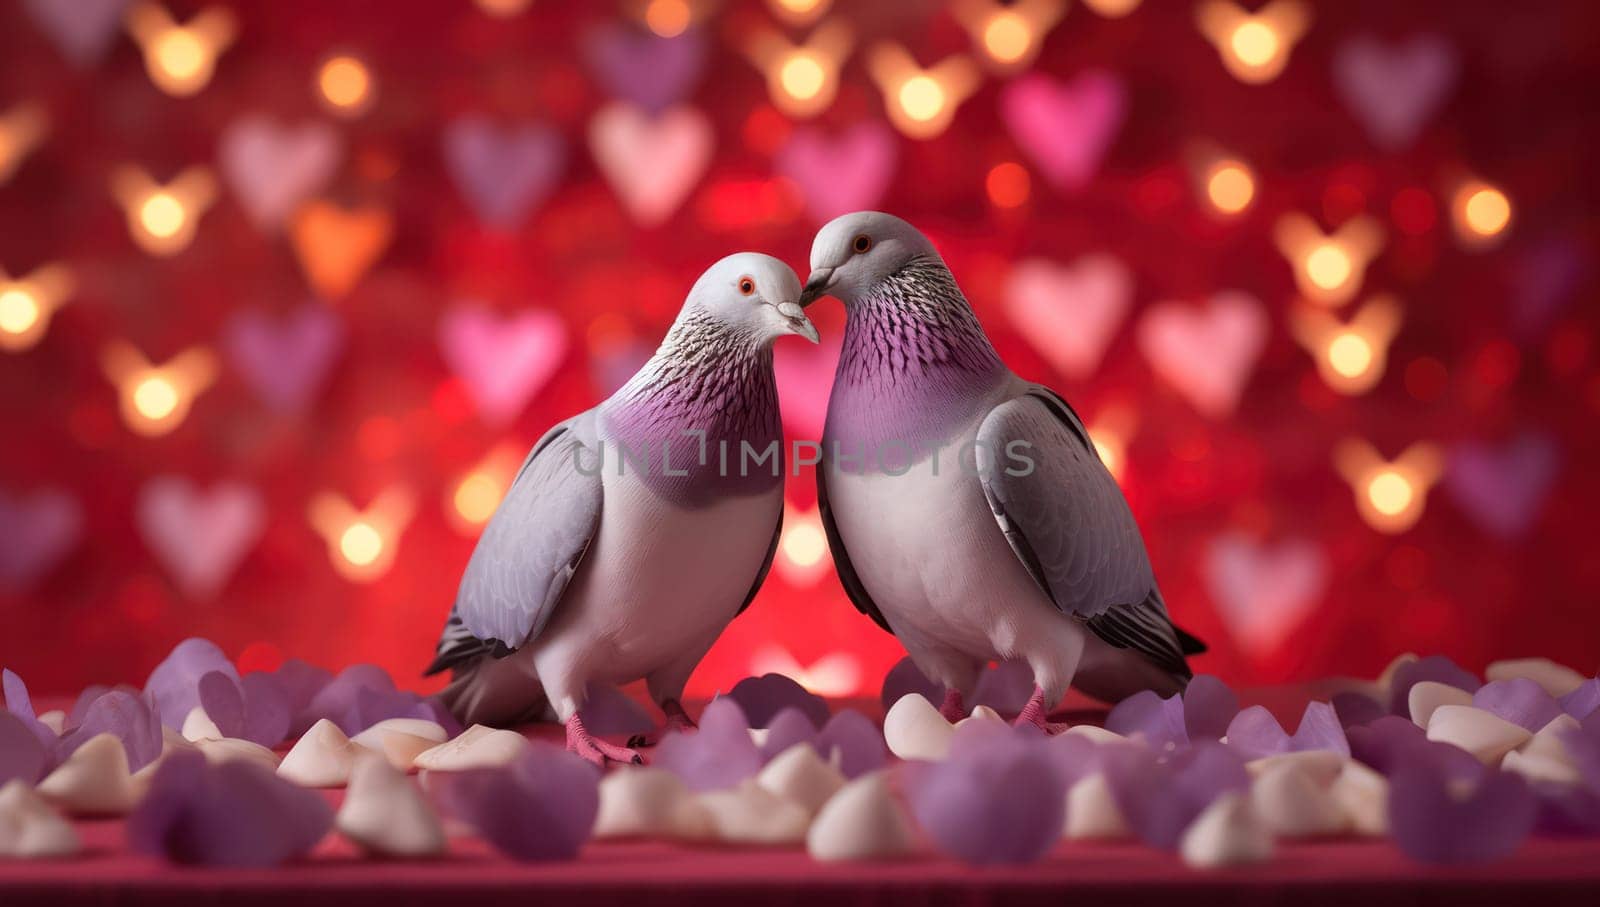 Lovebirds on Grey: A Beautiful and Cute Couple of Doves Showing Affection, Sitting on a Perched Branch with Green Background.